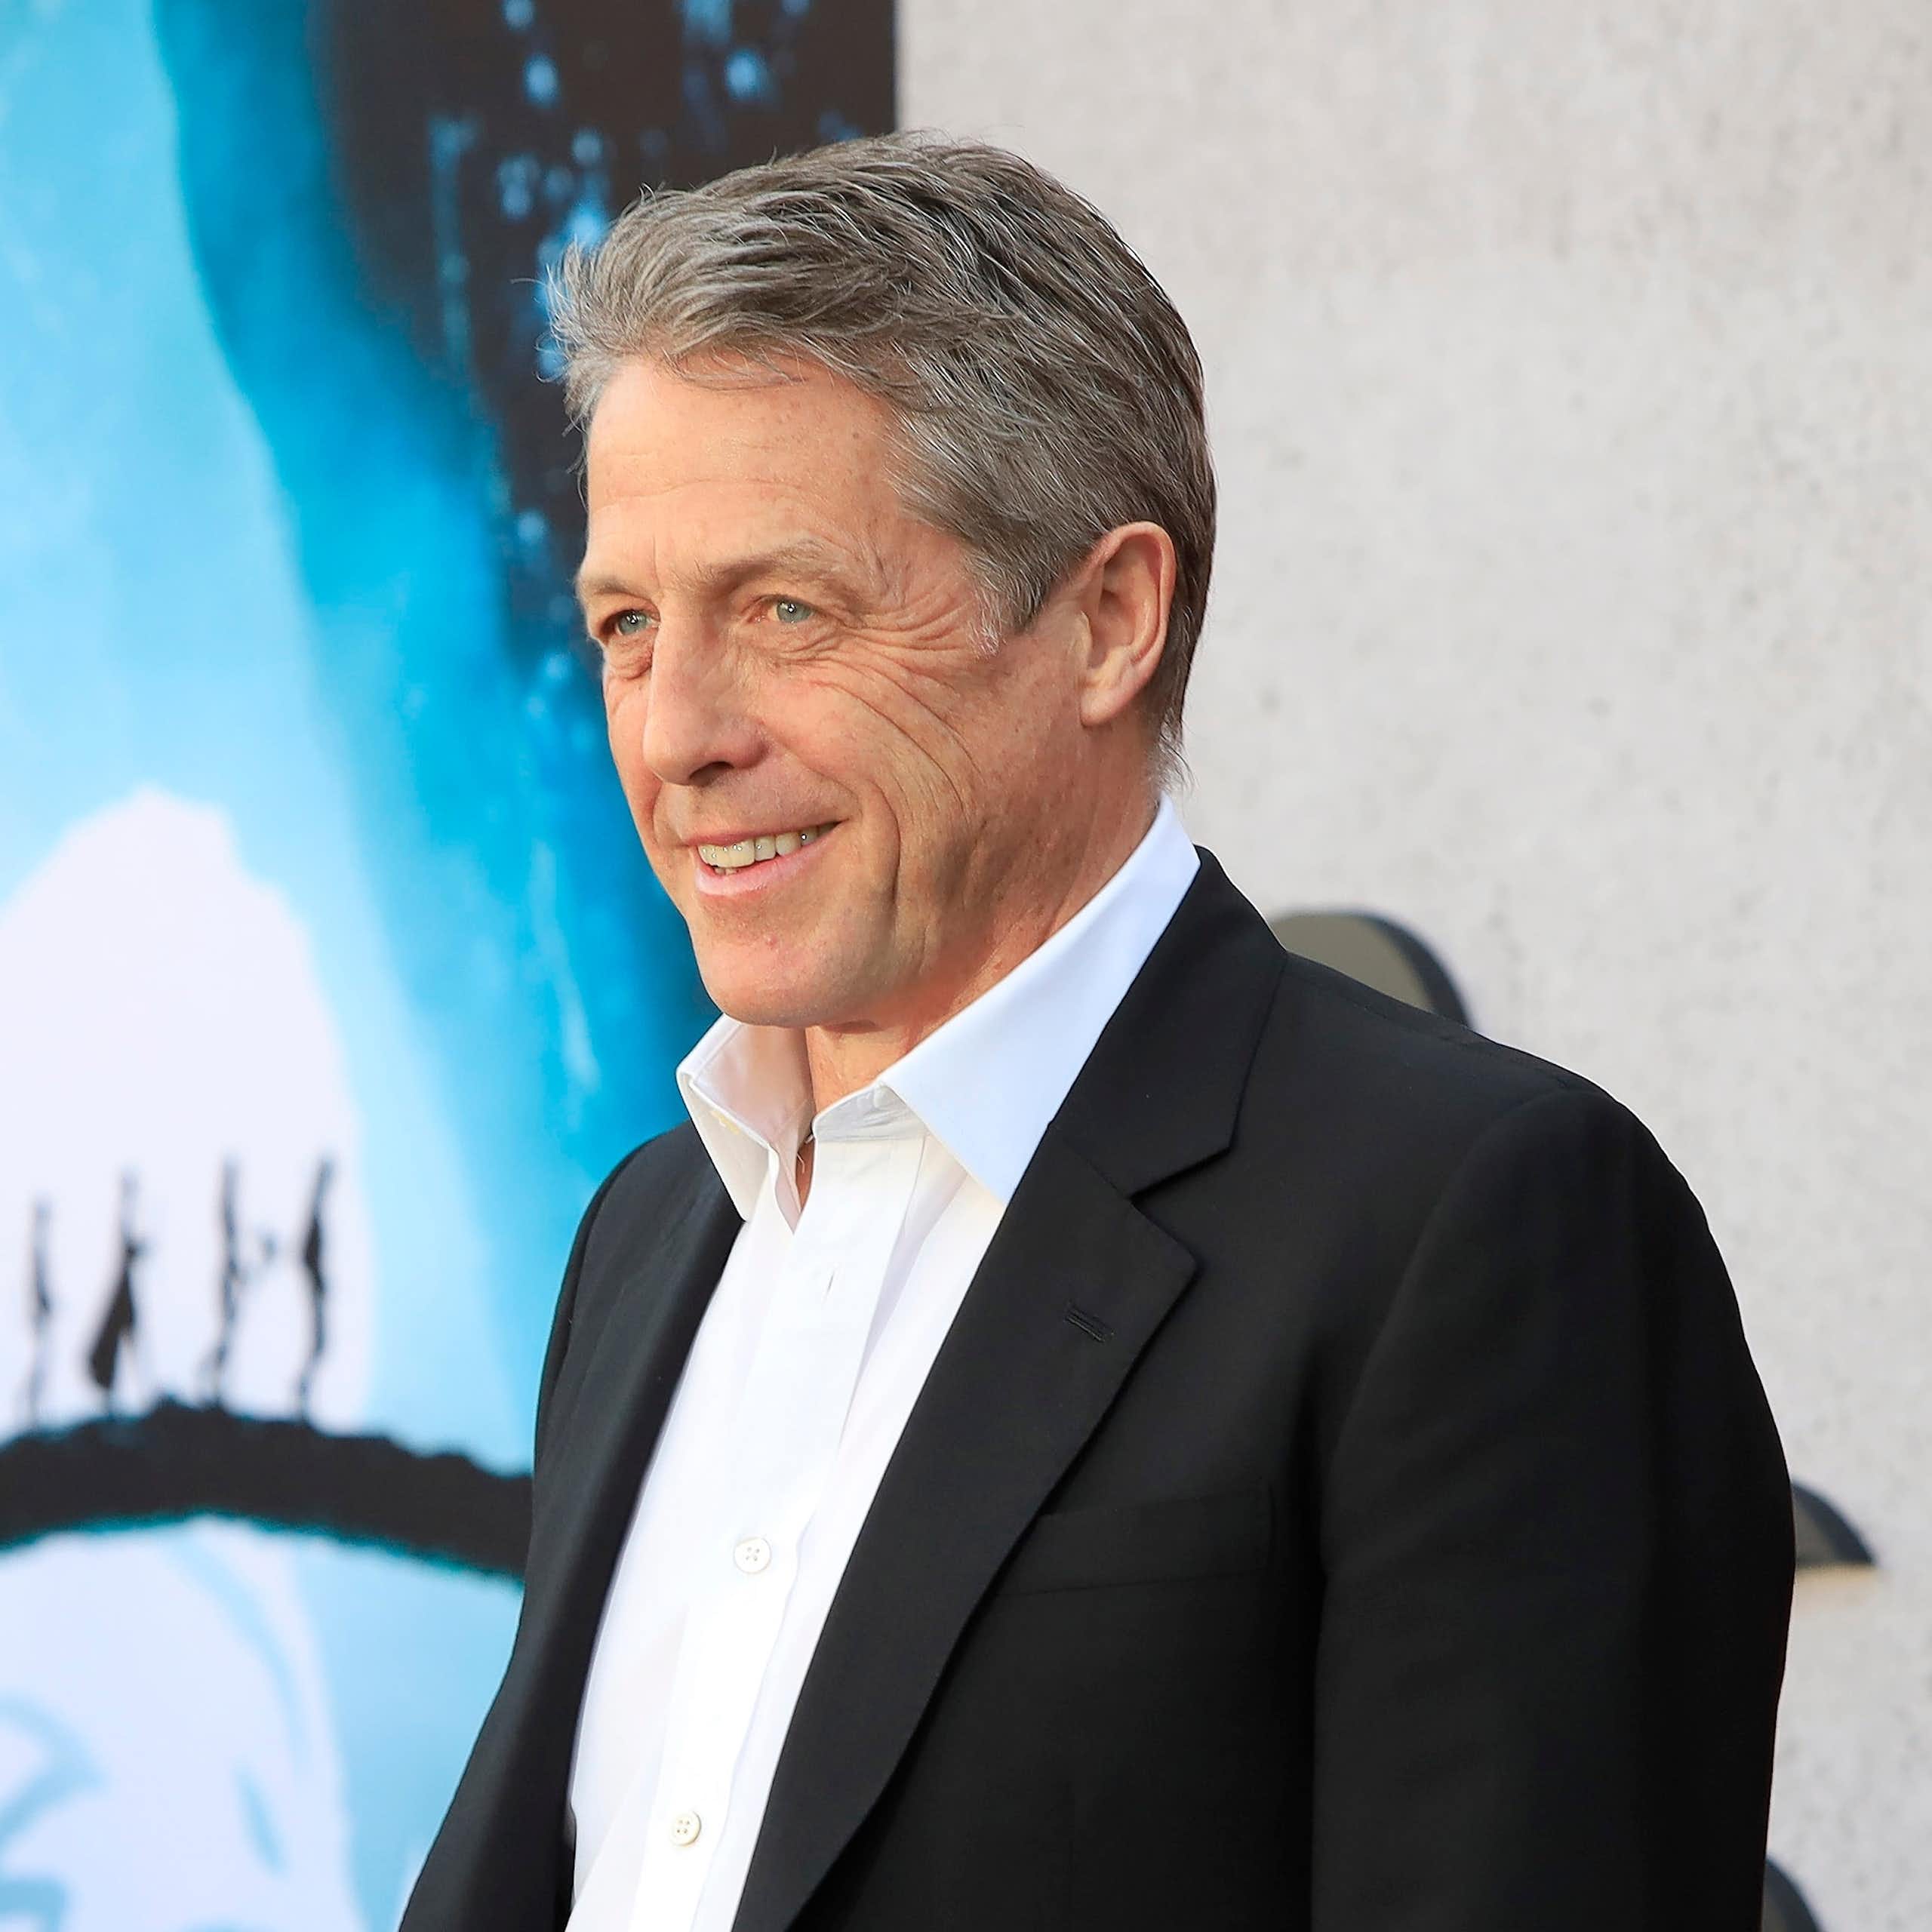 Actor Hugh Grant at the premiere of a film